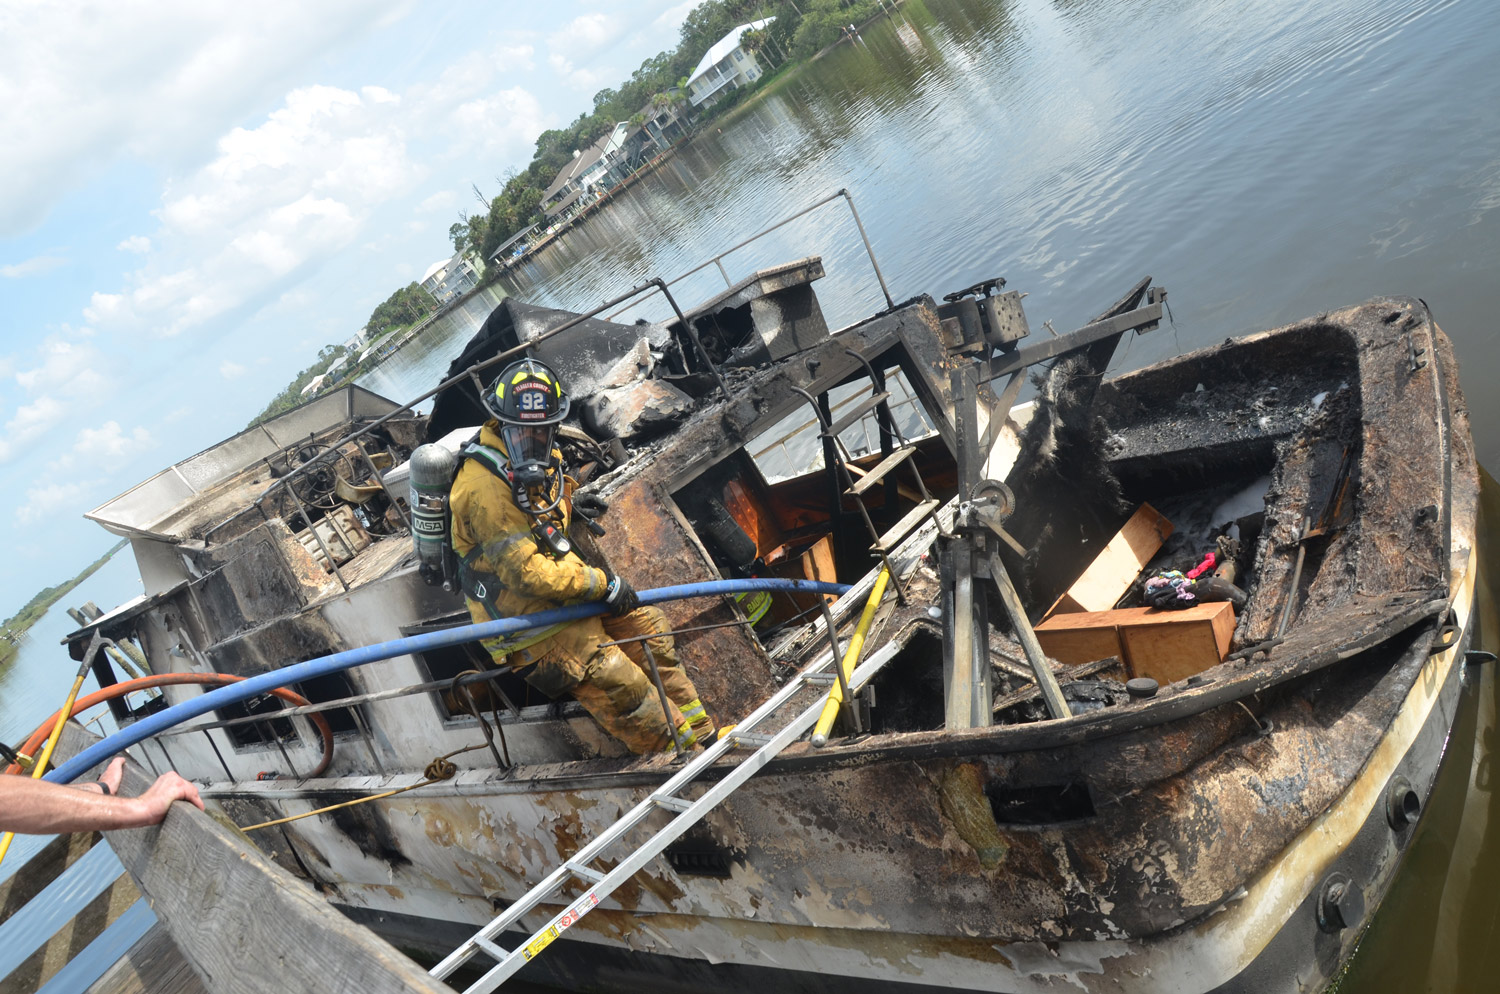 The trawler had started its journey in DeLand. It began smoking near the Flagler Beach bridge, where its pilot docked it and got off as the flames went out of control. Two hours later the boat was totaled. Click on the image for larger view. (© FlaglerLive)